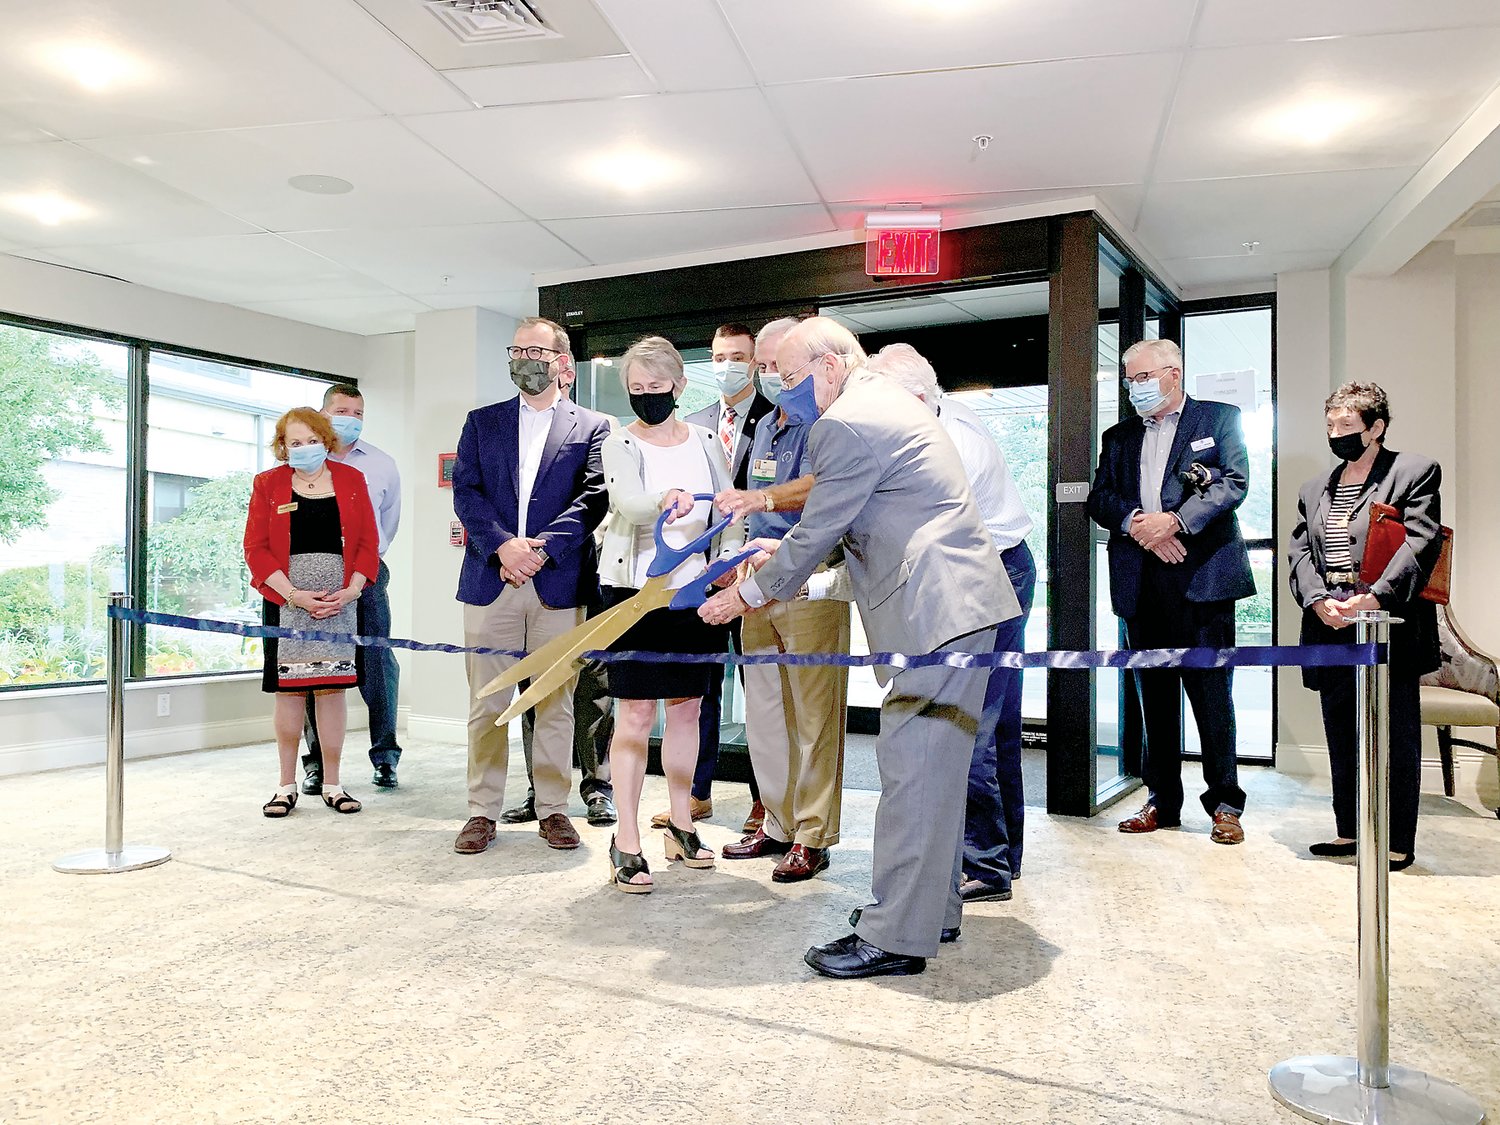 Wesley Enhanced Living Doylestown held a ribbon cutting on Sept. 9 to unveil the completion of a two-year, multimillion-dollar renovation project and to celebrate four decades of service to seniors in Bucks County.